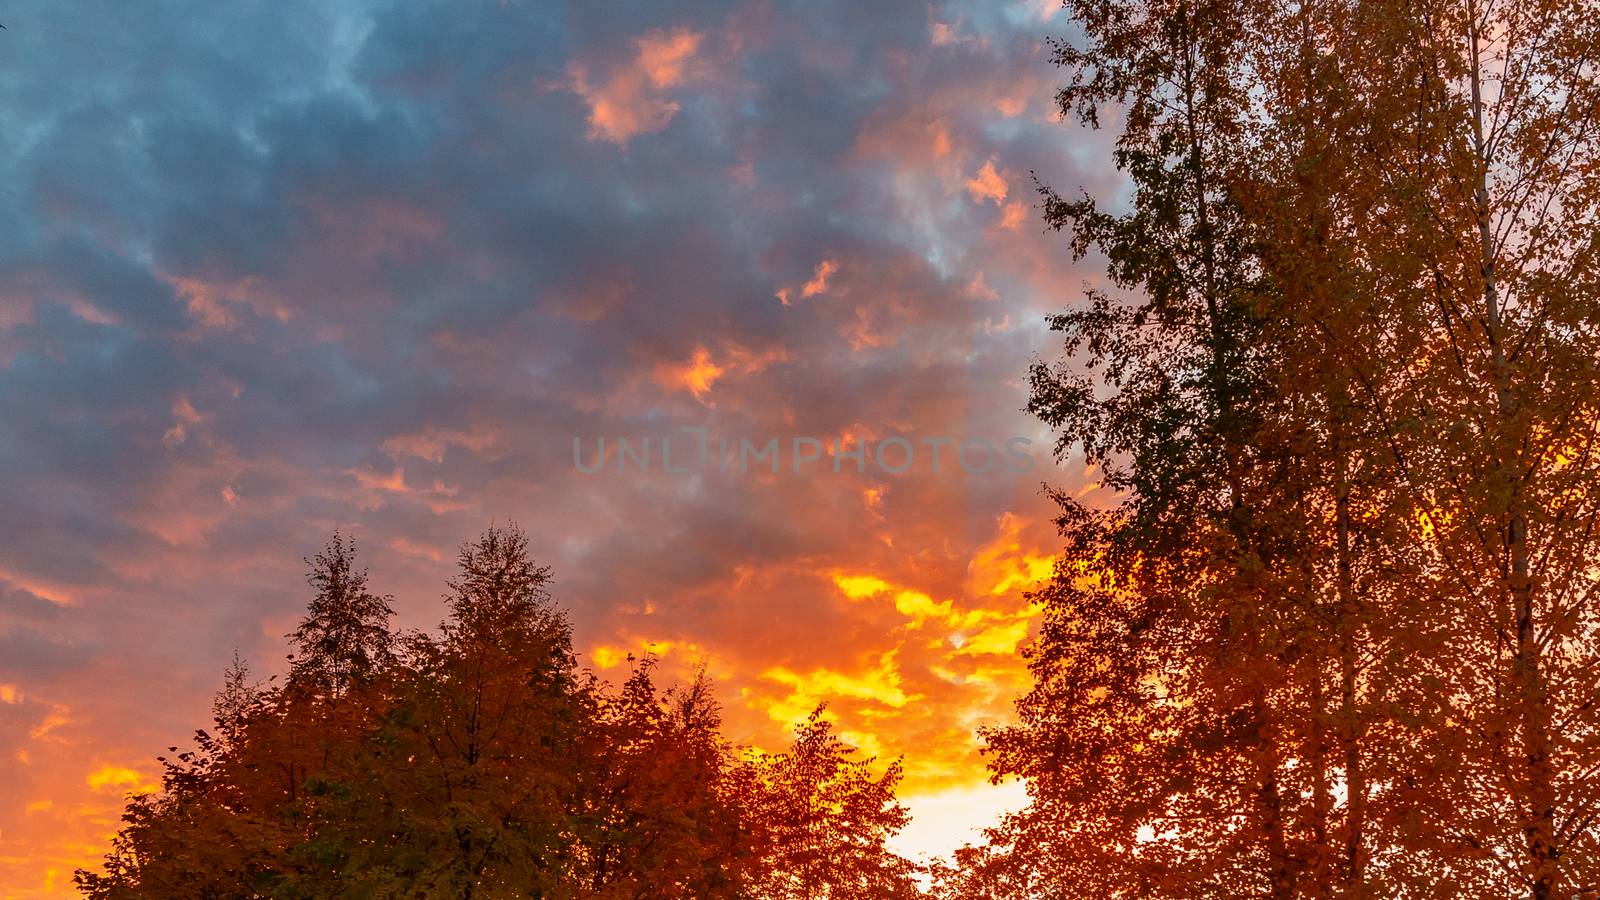 Autumn treetops against a cloudy sky at sunset. Background by galsand